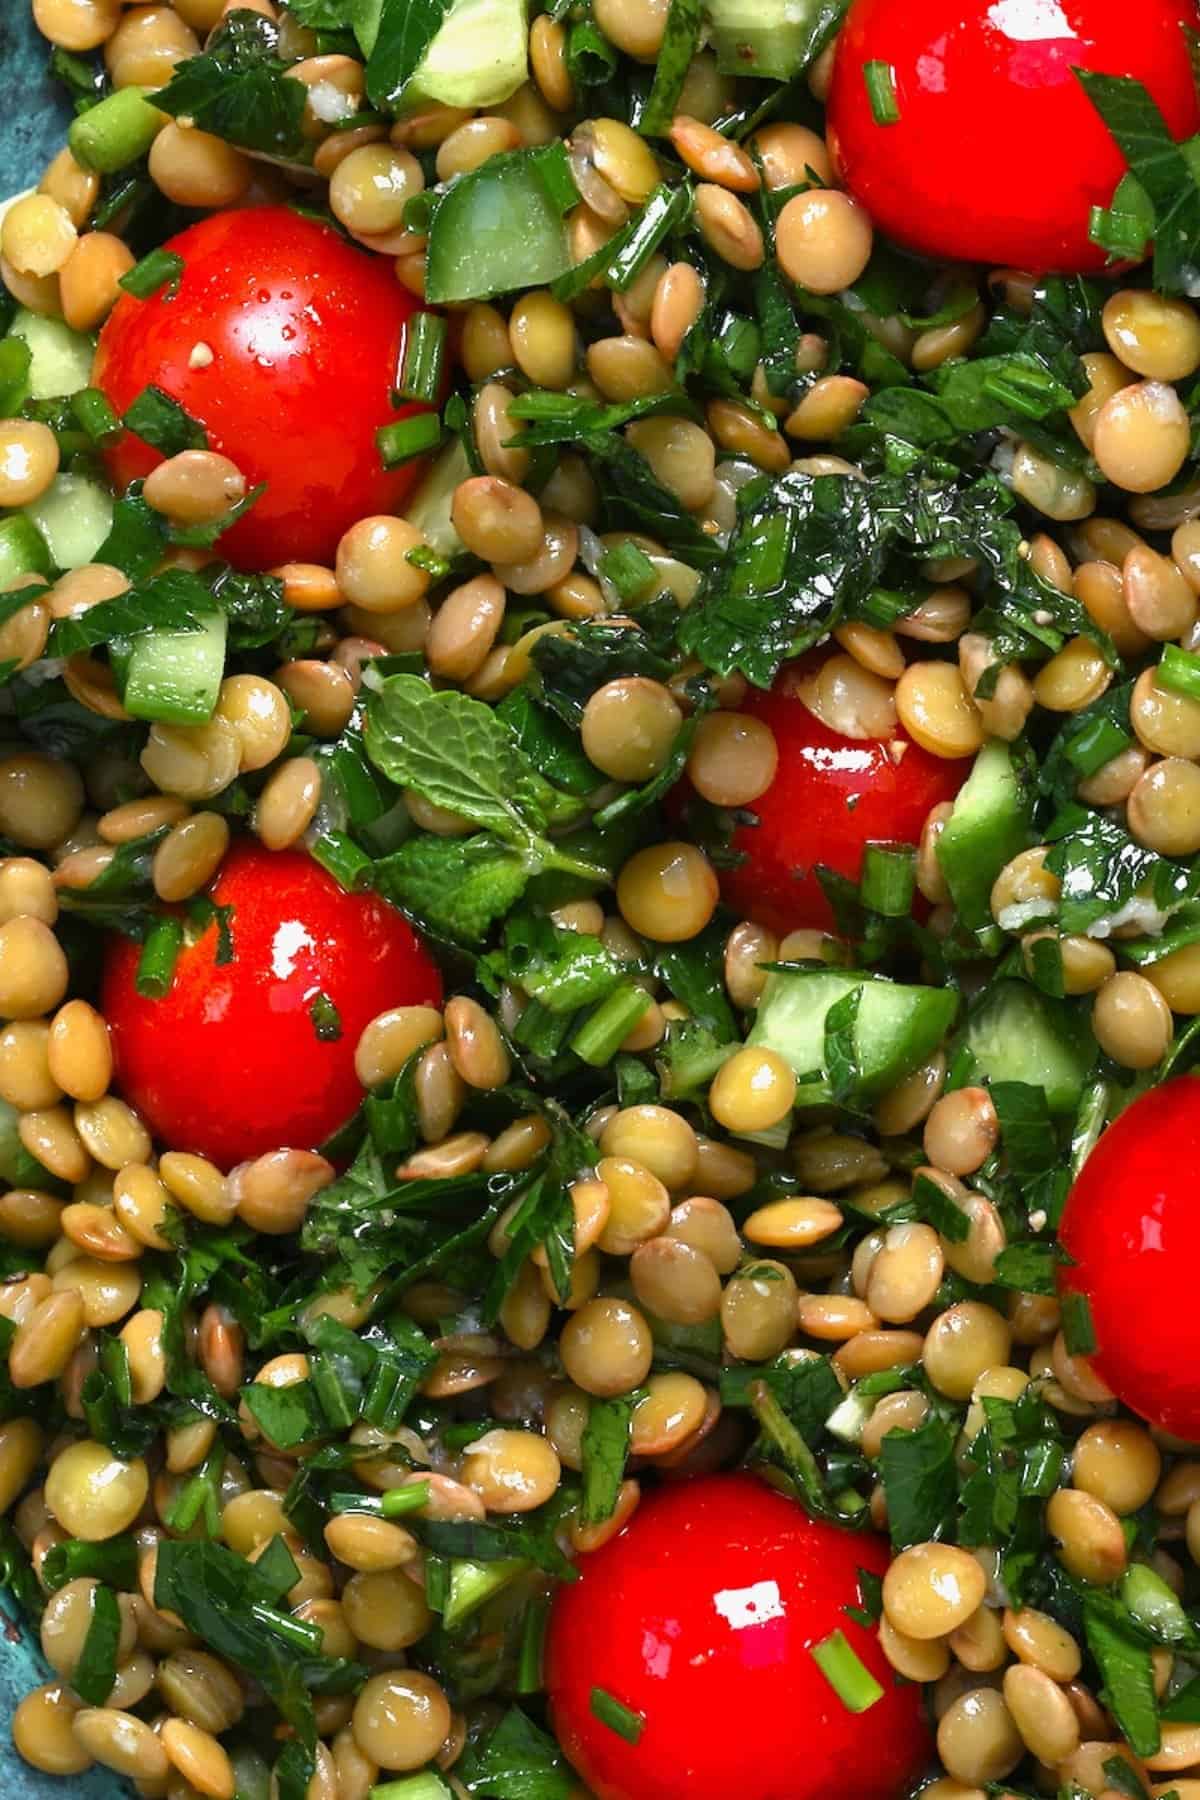 A close up of lentil salad with tomatoes